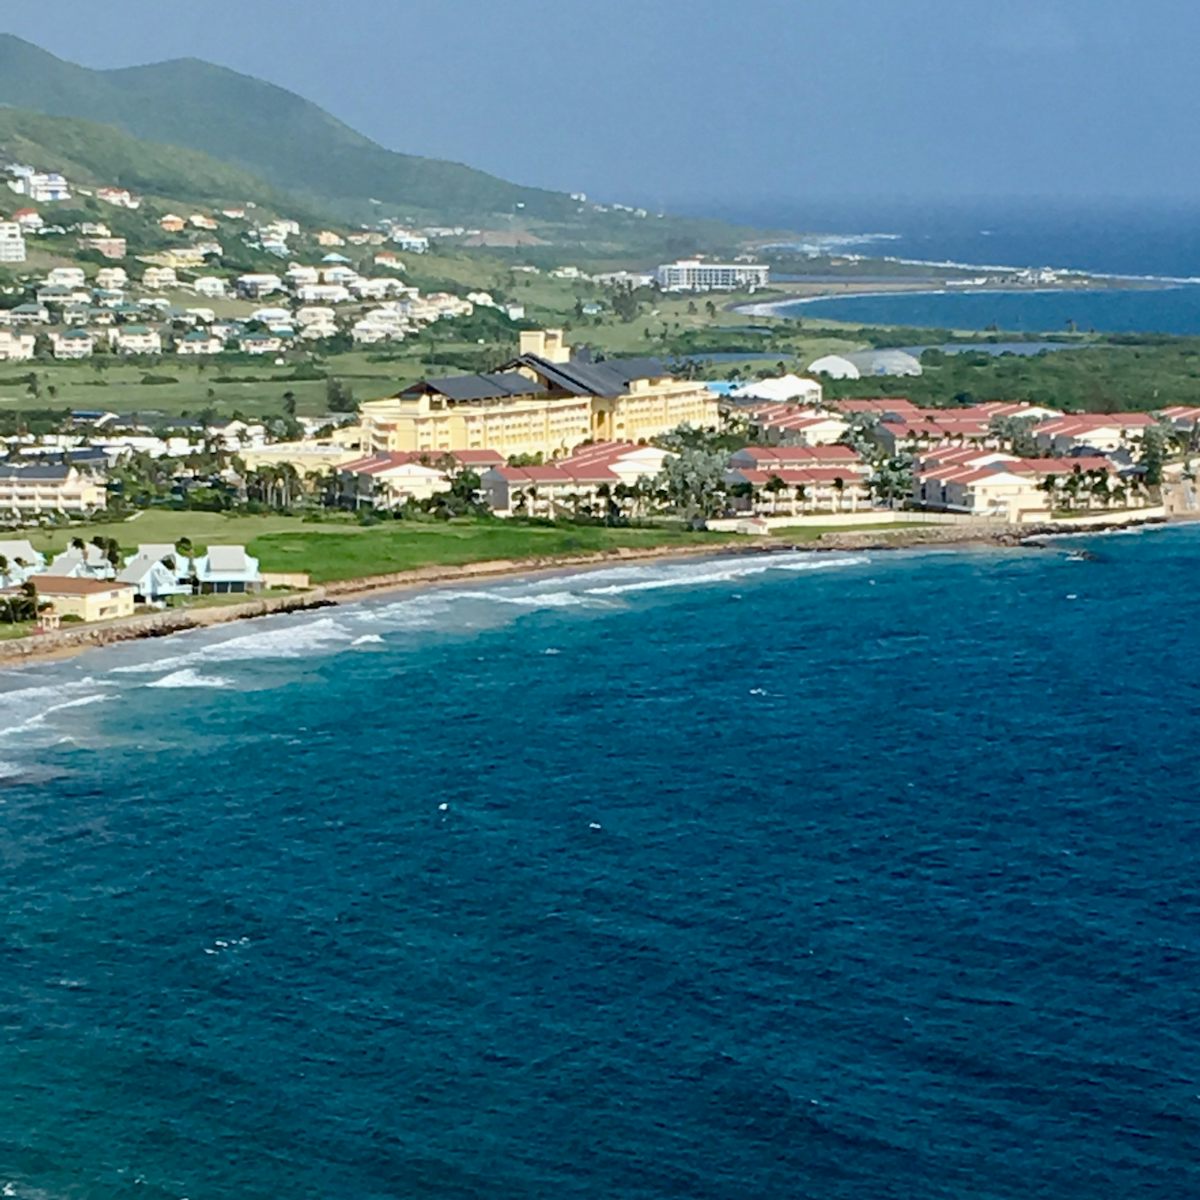 St. Kitts, on top of mountain looking down onto the Marriott.